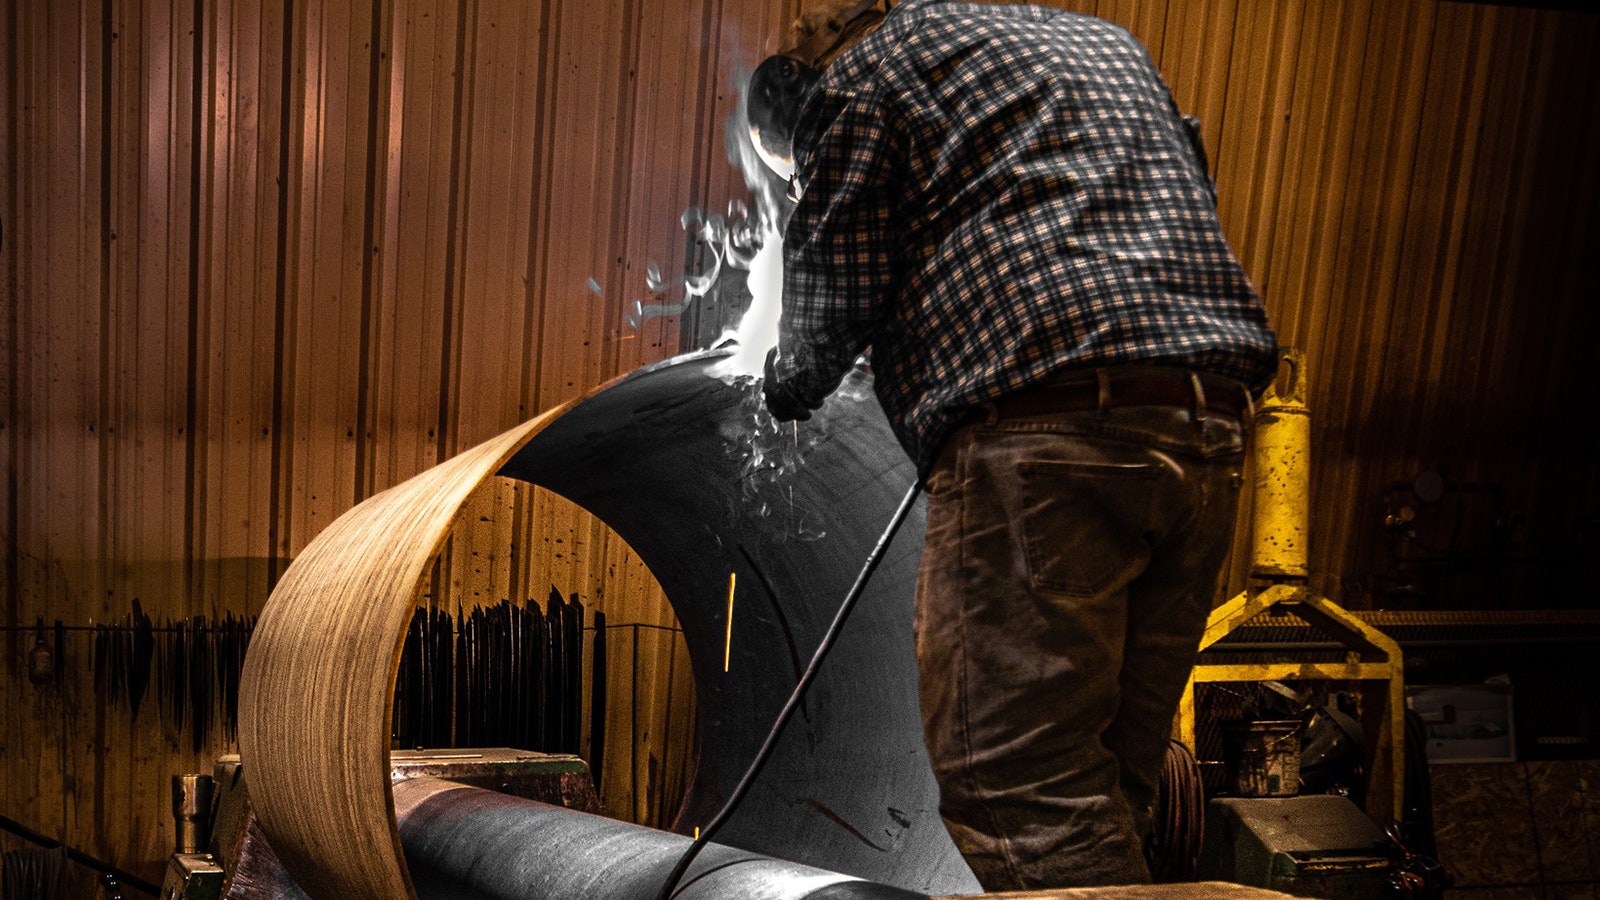 A worker at High Country Fabrication works on turning a flat sheet of steel into a rounded vessel in the roller area.